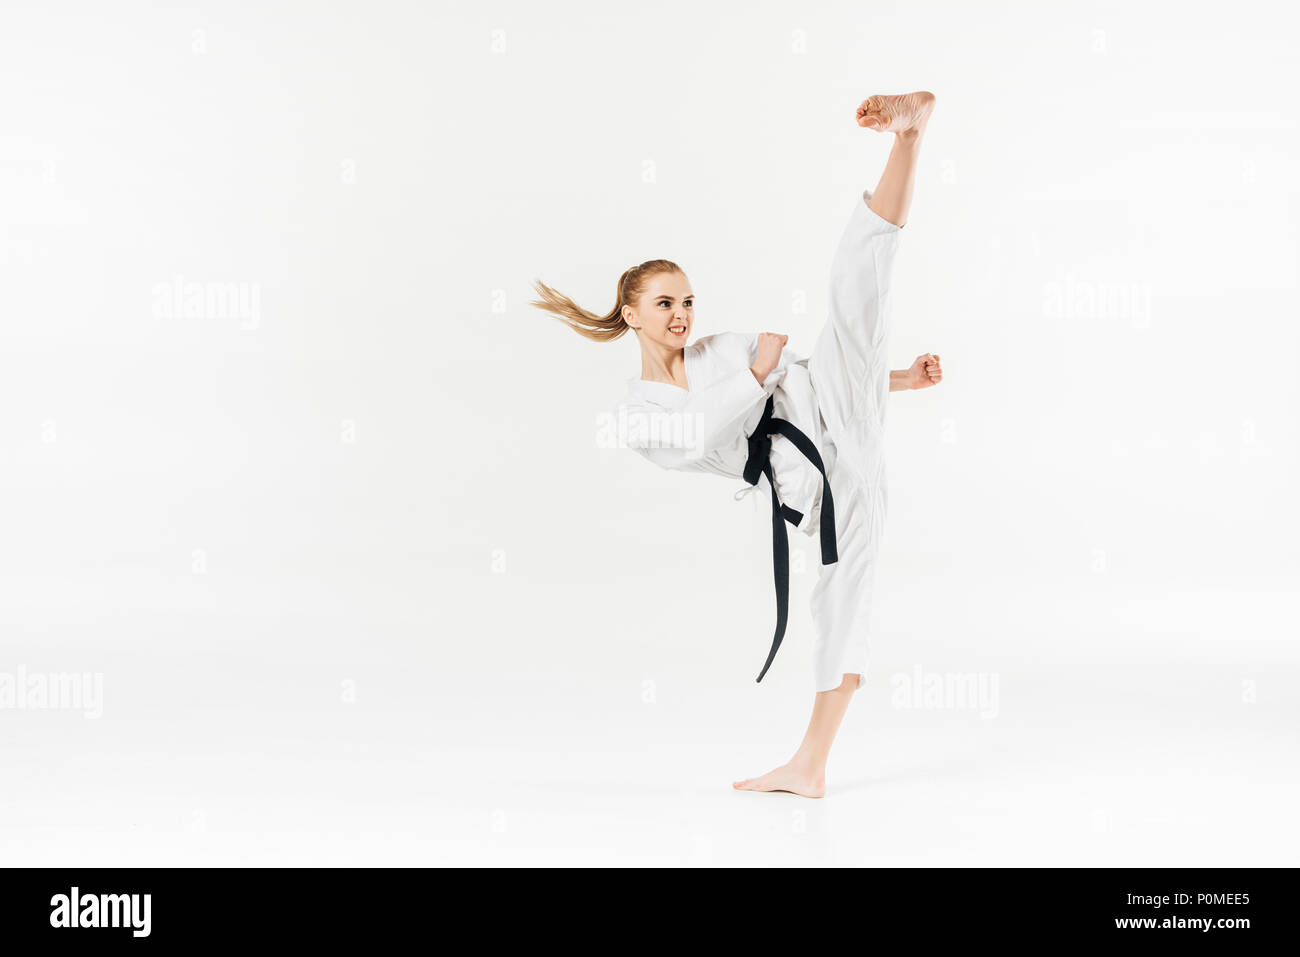 female karate fighter with black belt performing kick isolated on white Stock Photo